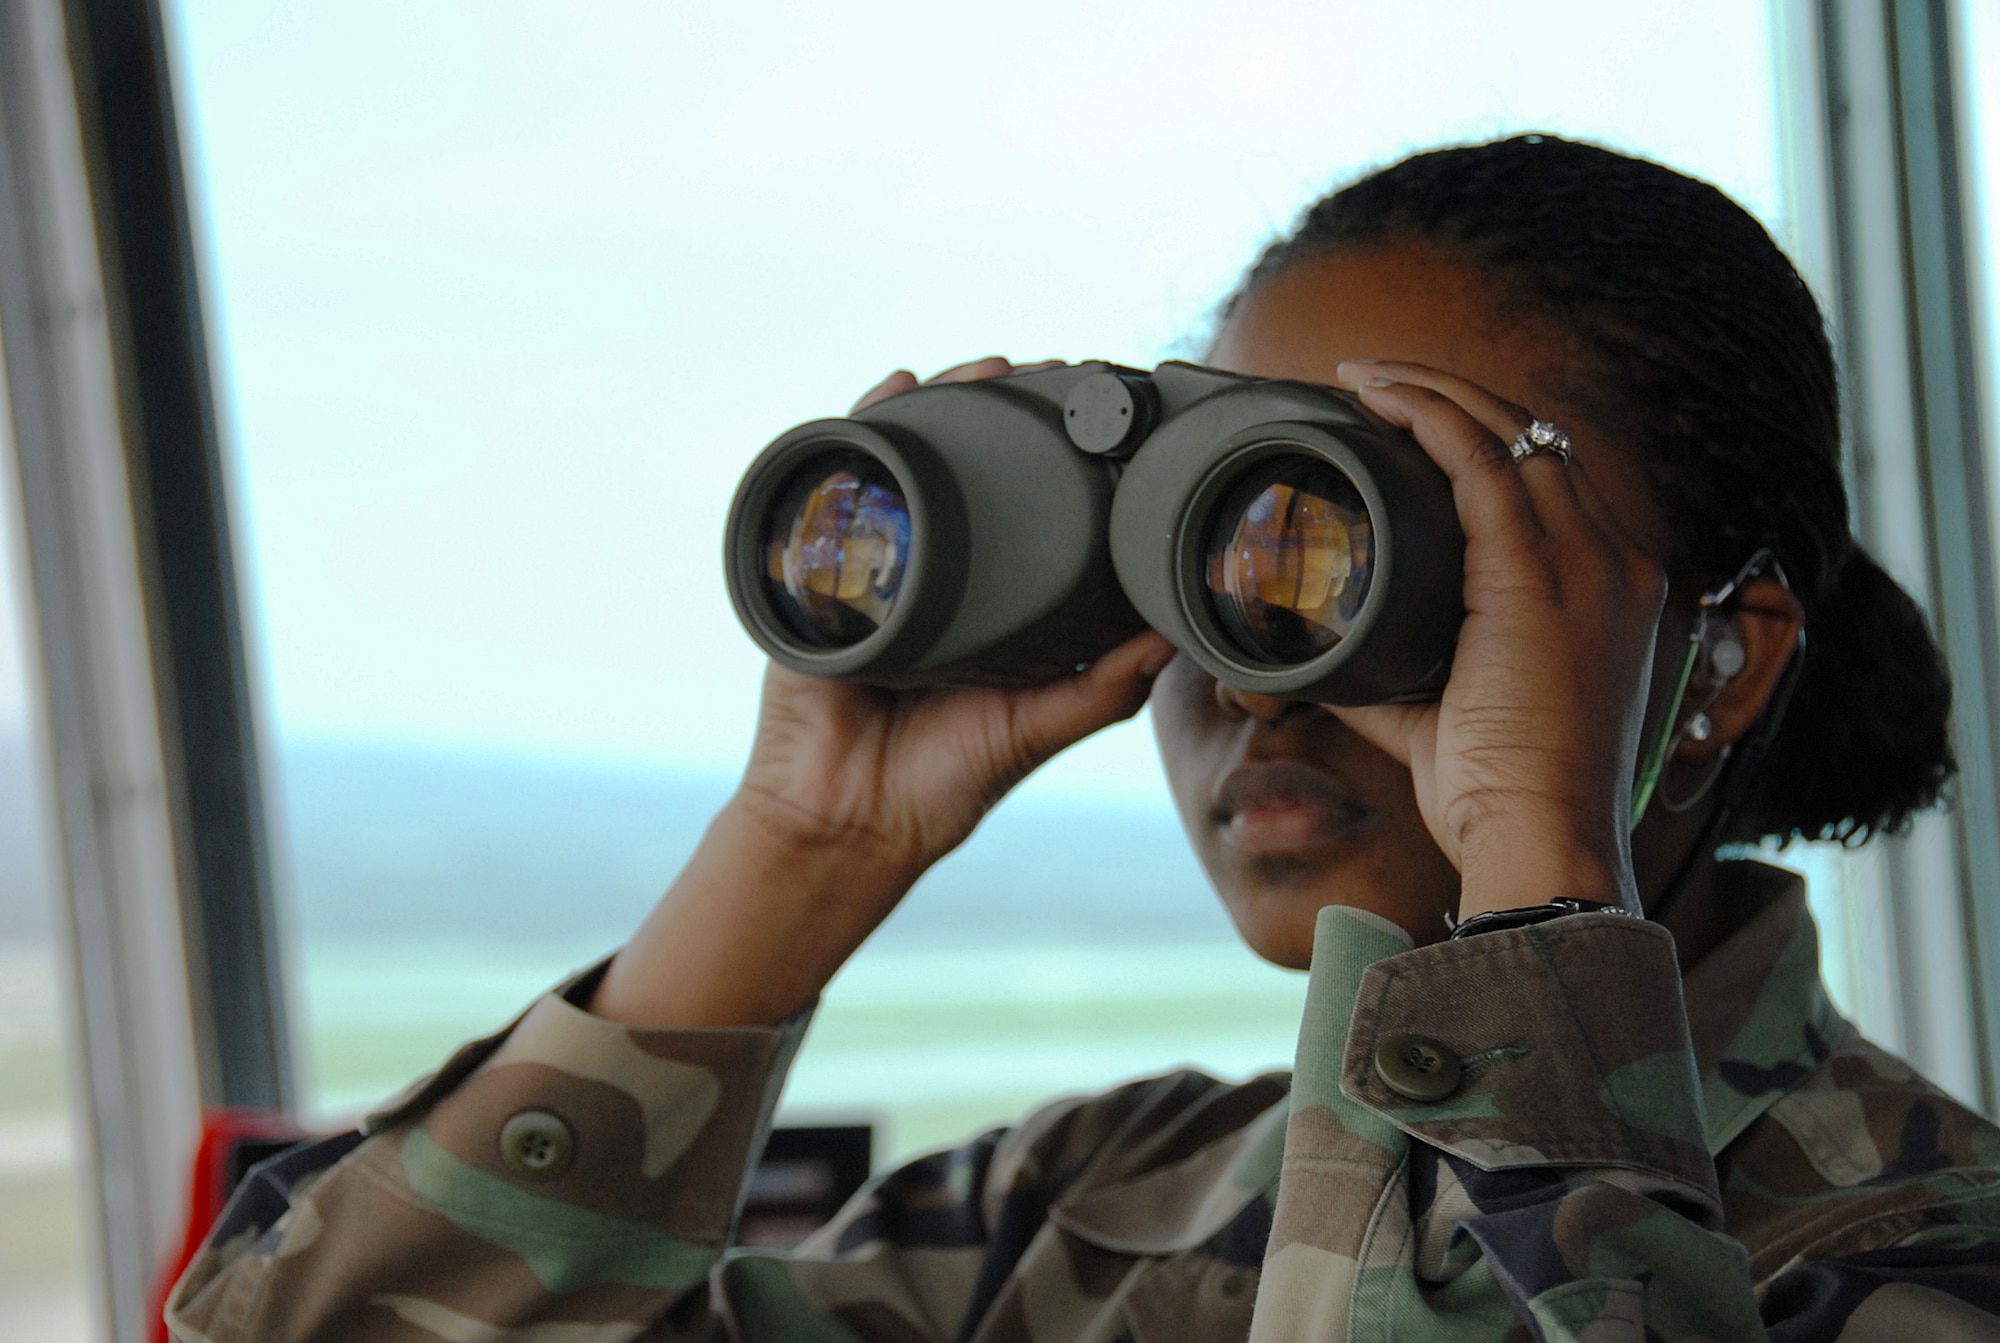 Senior Airman Laquetta Spann, 18th Operations Support Squadron, monitors an inbound aircraft during local operational readiness exercise Beverly High 08-4 at Kadena Air Base, Japan, Feb. 12, 2008. The 18th Wing conducted the exercise from Feb. 10 to 15 to test Airmen's ability to respond in contingency situations. (U.S. Air Force photo/Tech. Sgt. Anthony Iusi) 